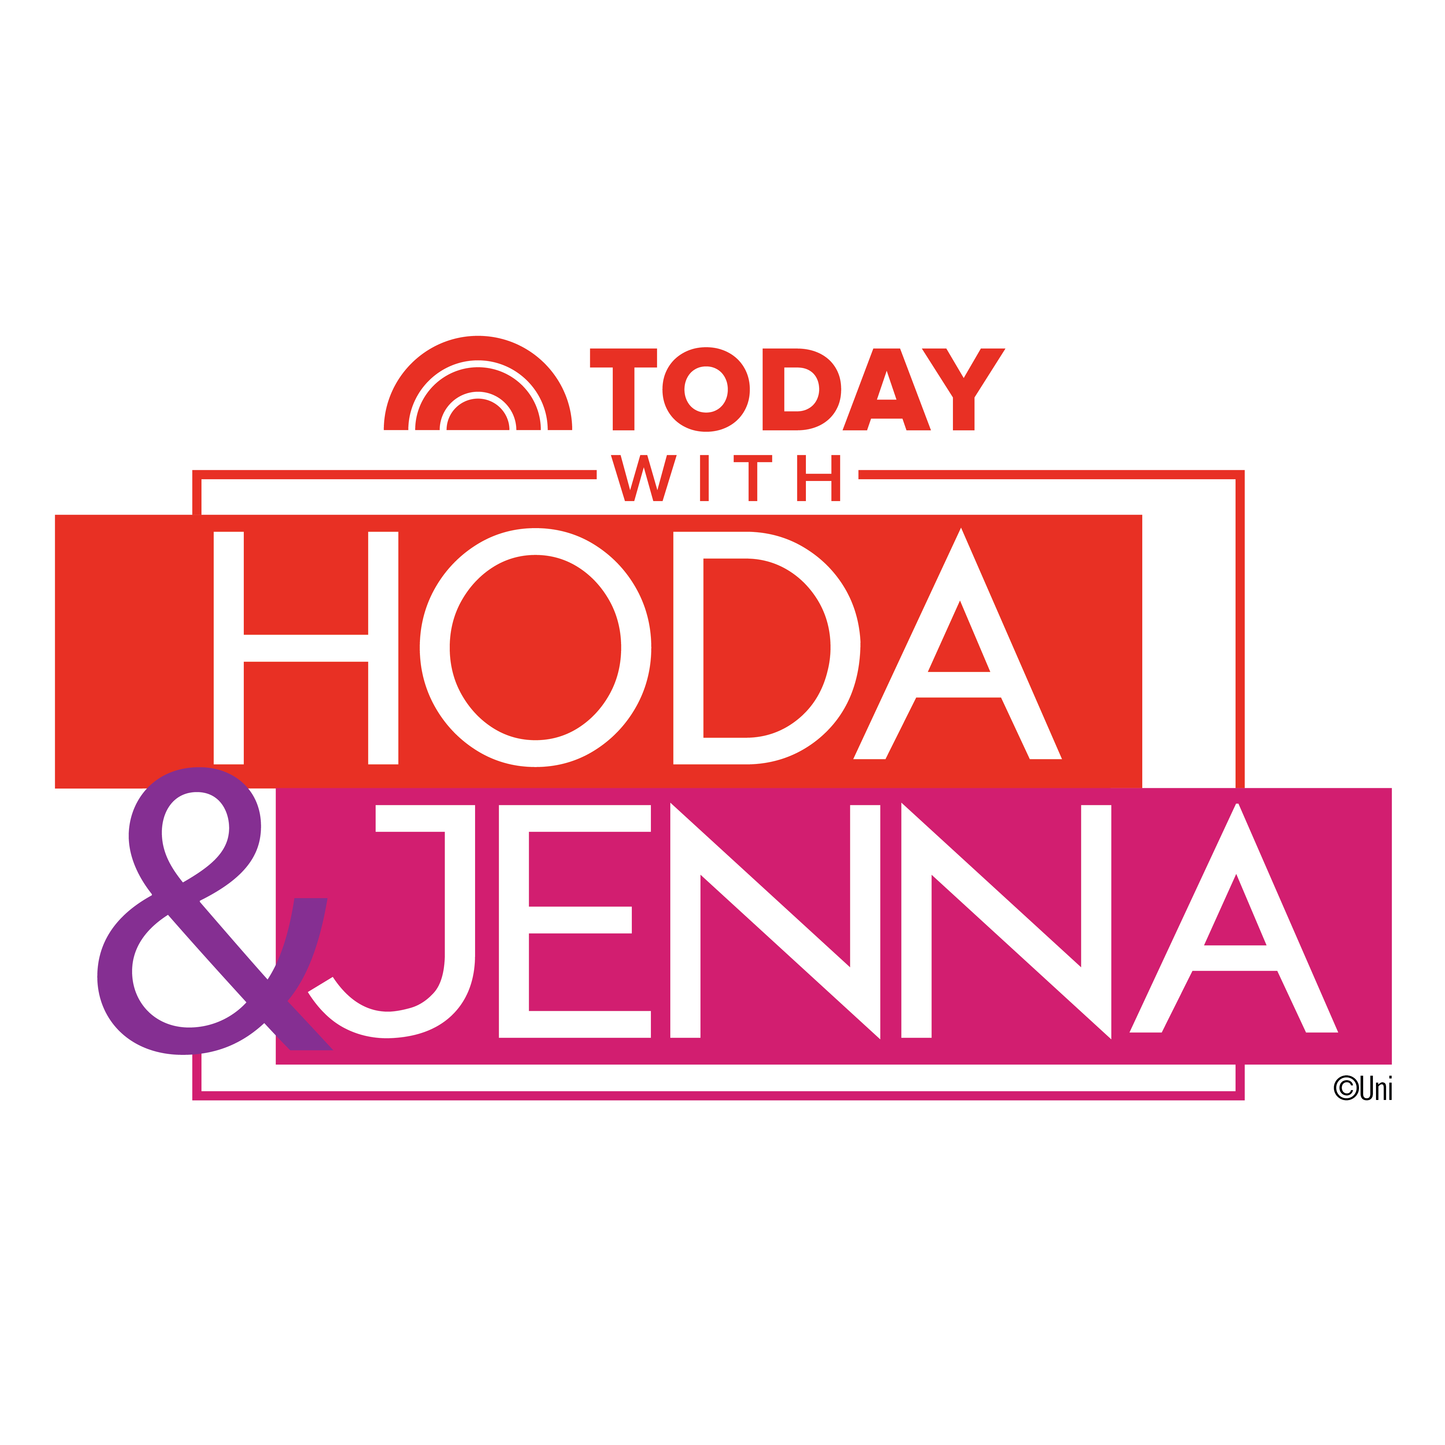 TODAY with Hoda & Jenna 16 oz Stainless Steel Thermal Travel Mug